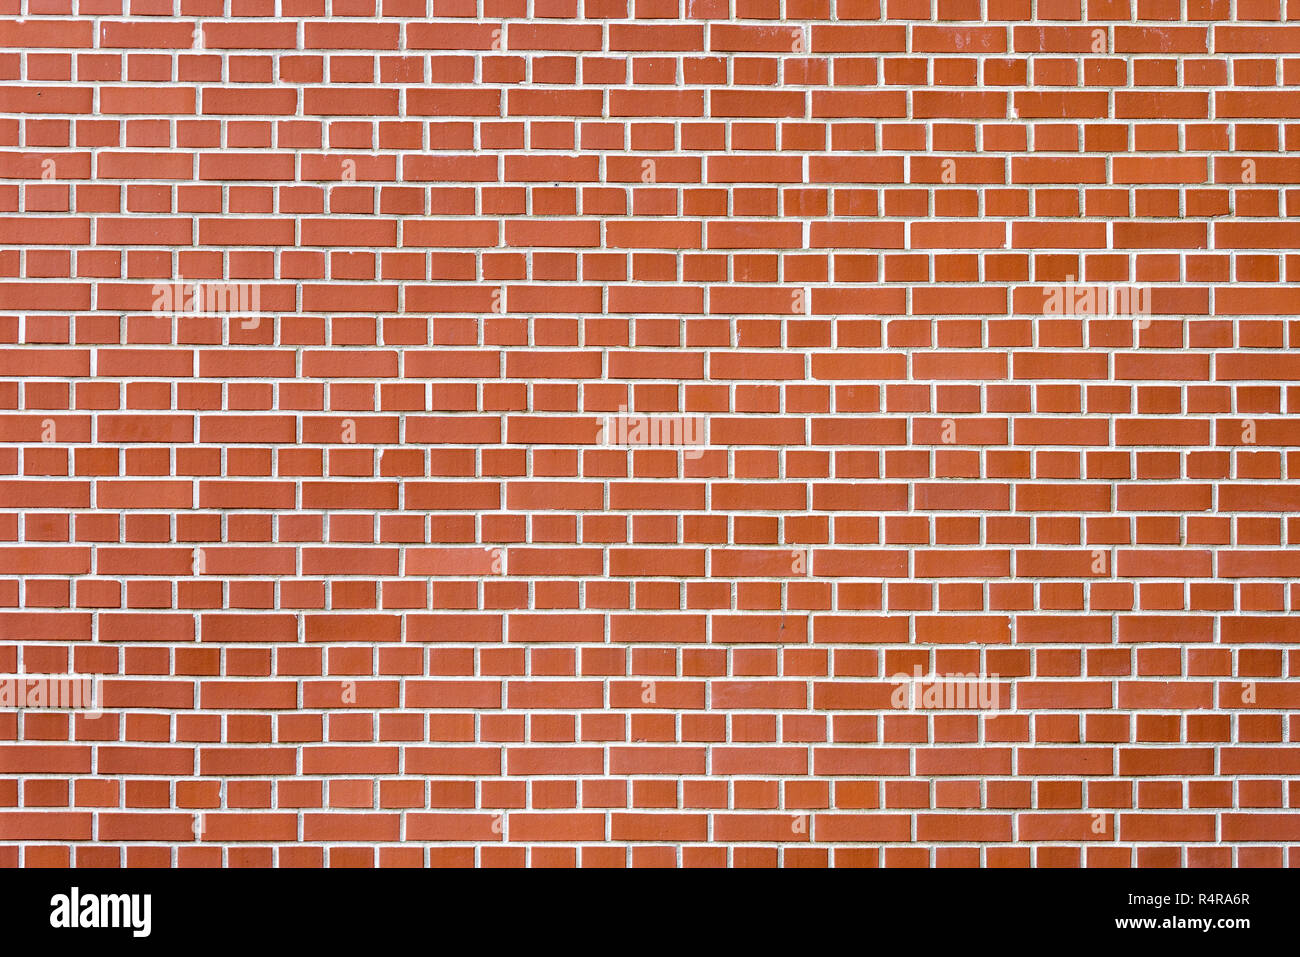 background made of red brick wall Stock Photo